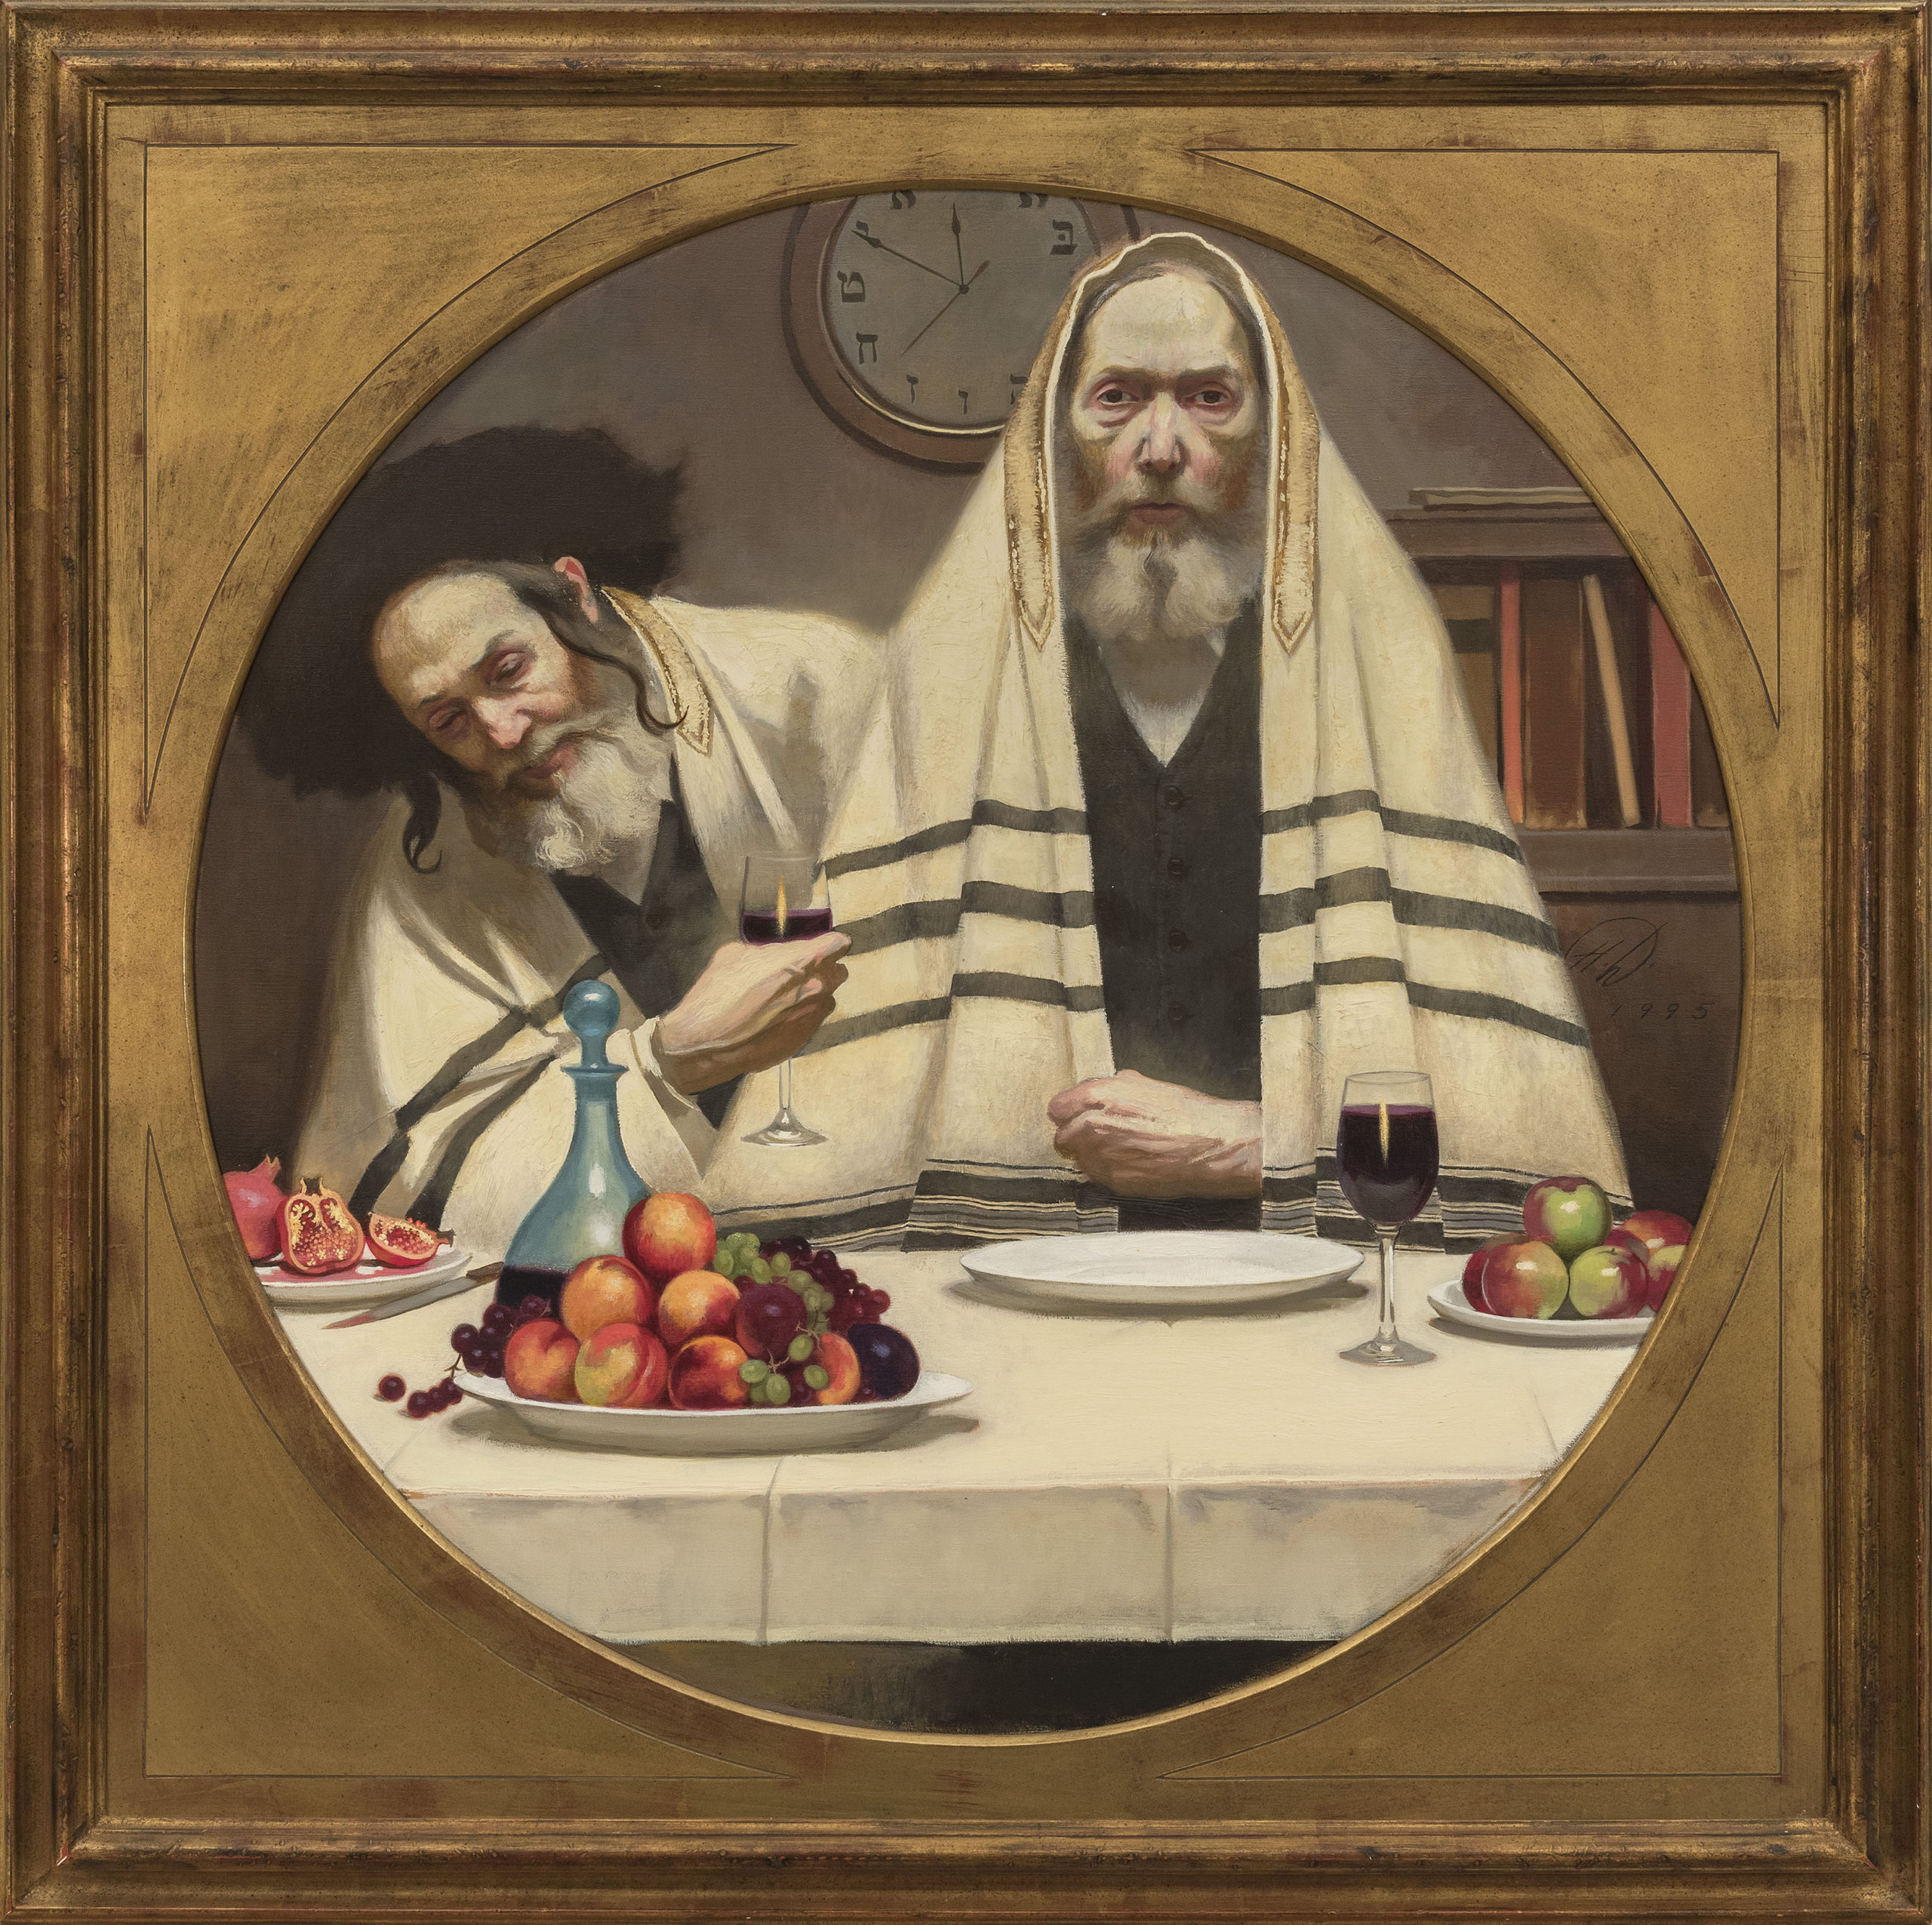 
		                					Harvey Dinnerstein		                																	
																											<i>Joy and Abstinence ,</i>  
																																								1995, 
																																								oil on canvas, 
																																								36 x 36 inches 
																								
		                				